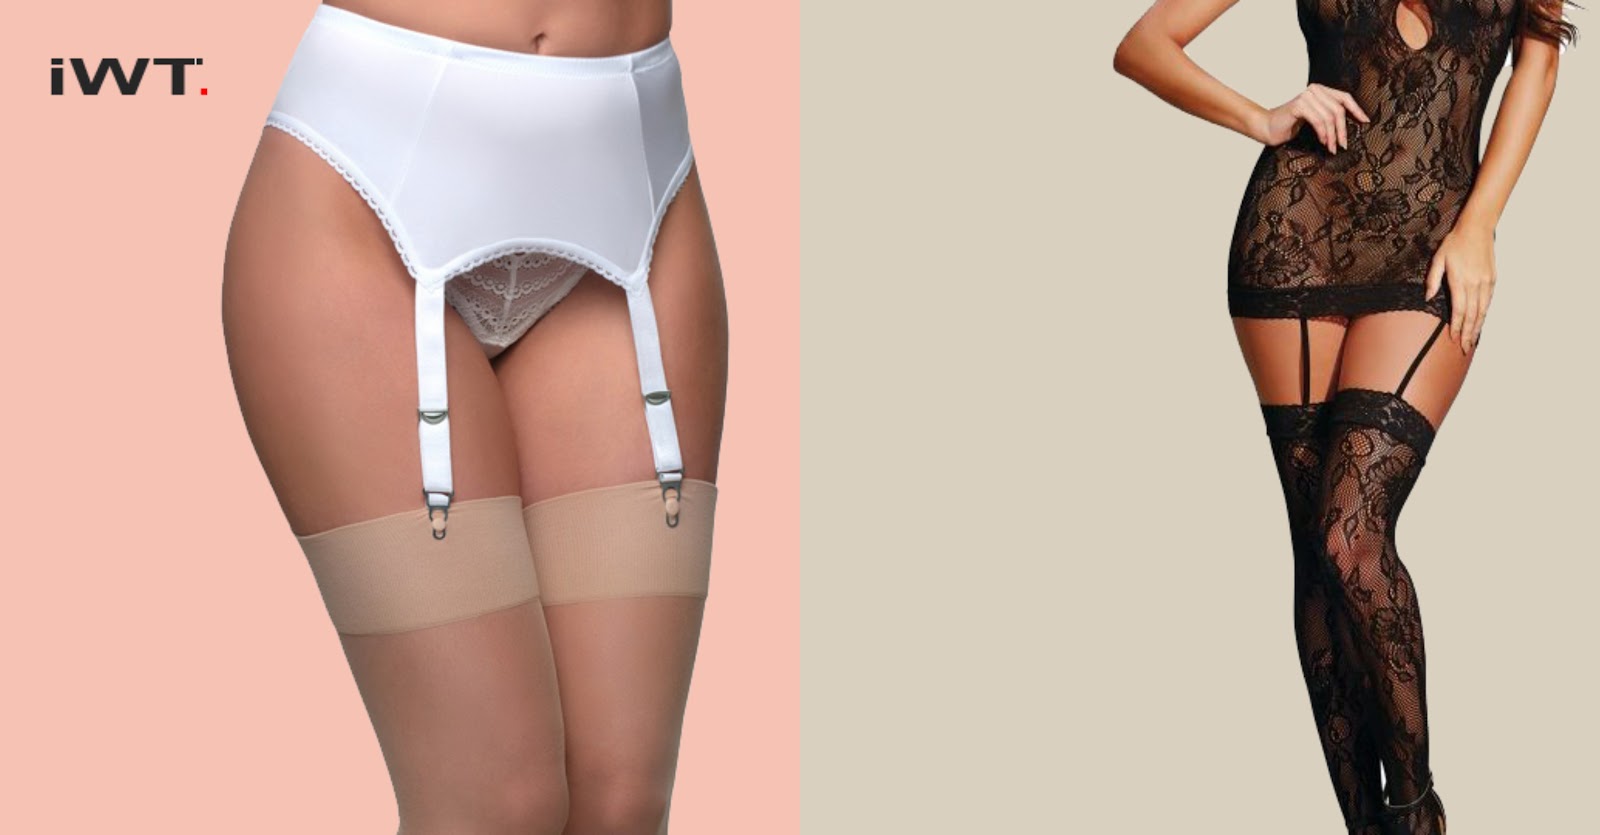 How To Wear Suspender Belts And Stockings- A Step By Step Guide